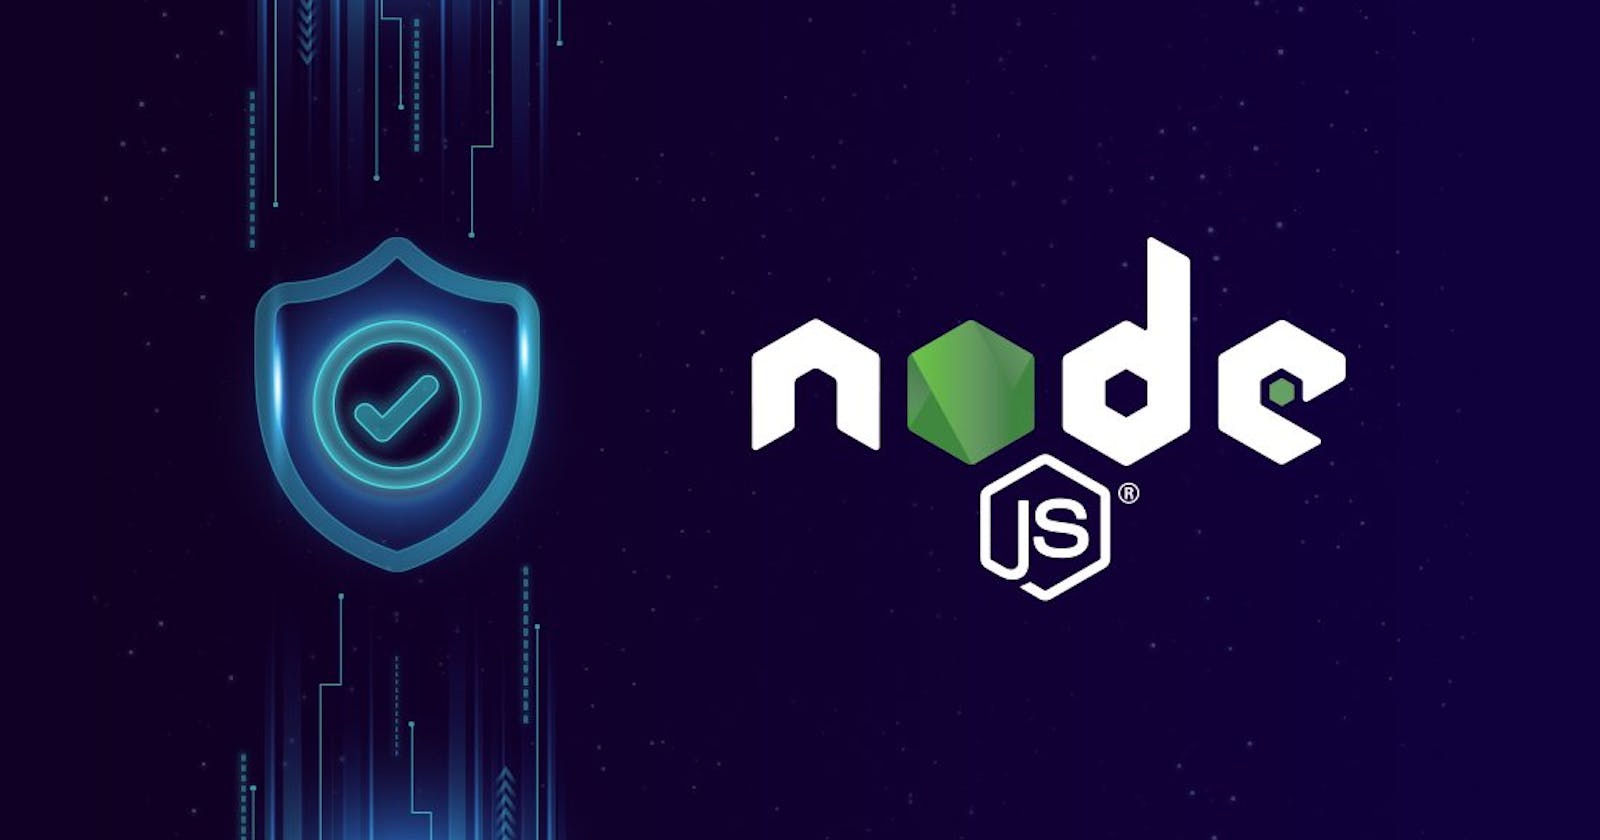 How to build an Authentication system using JWT in NodeJS: Part 2